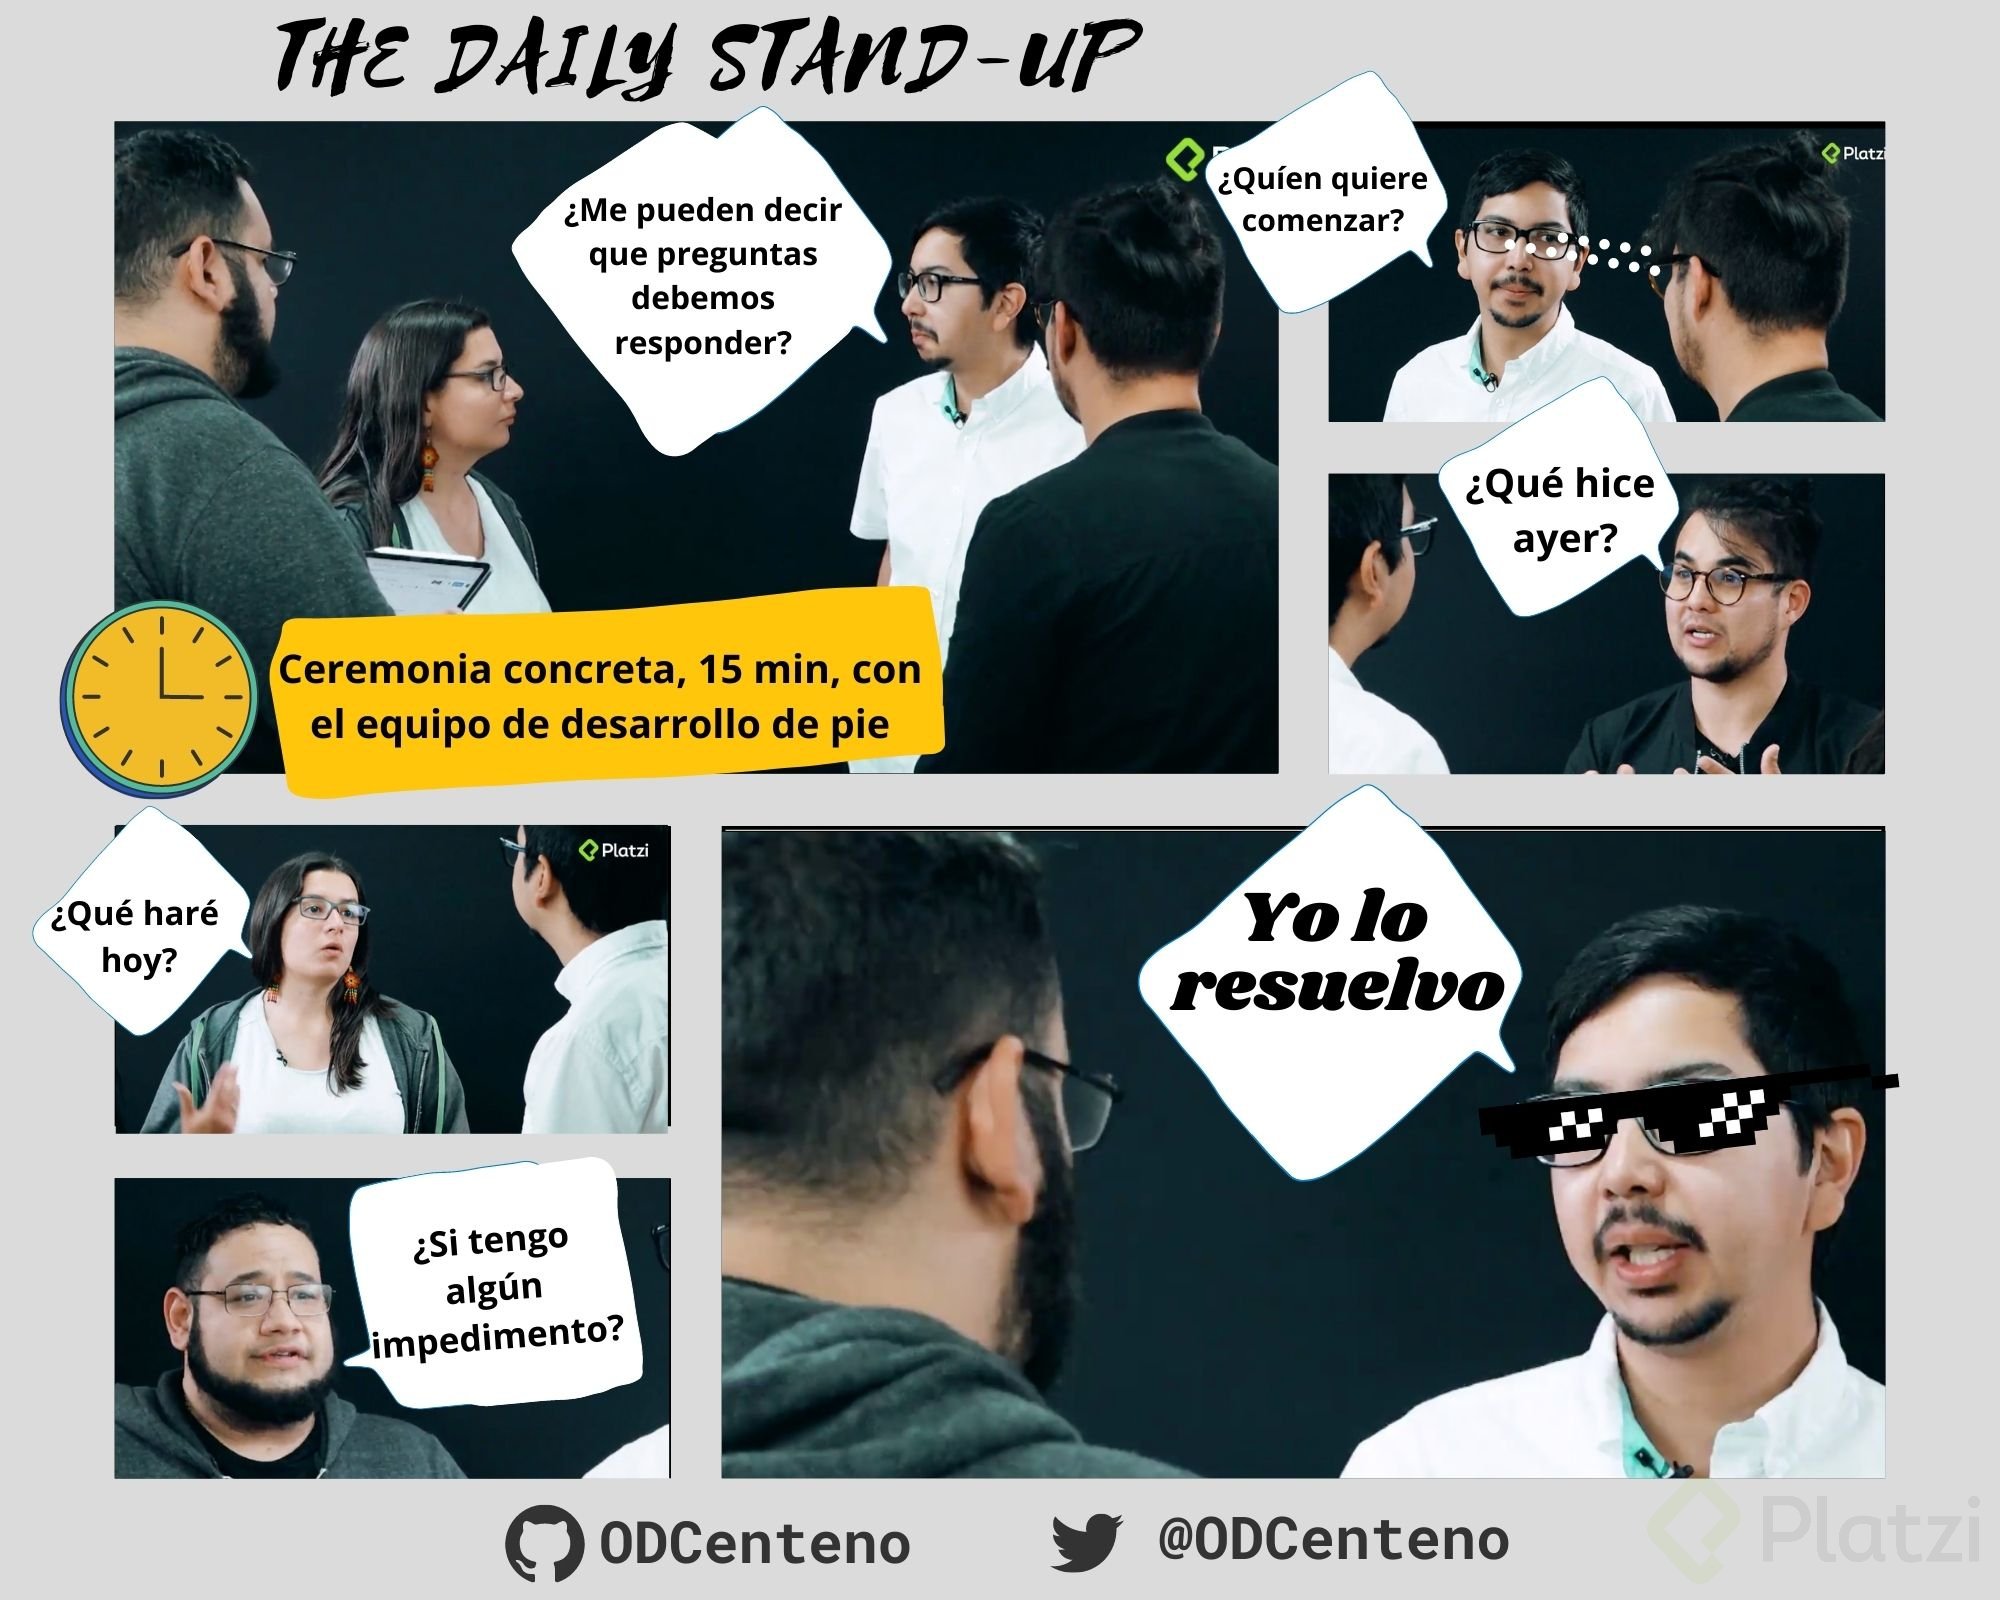 the-daily-stand-up-ODCenteno.jpg